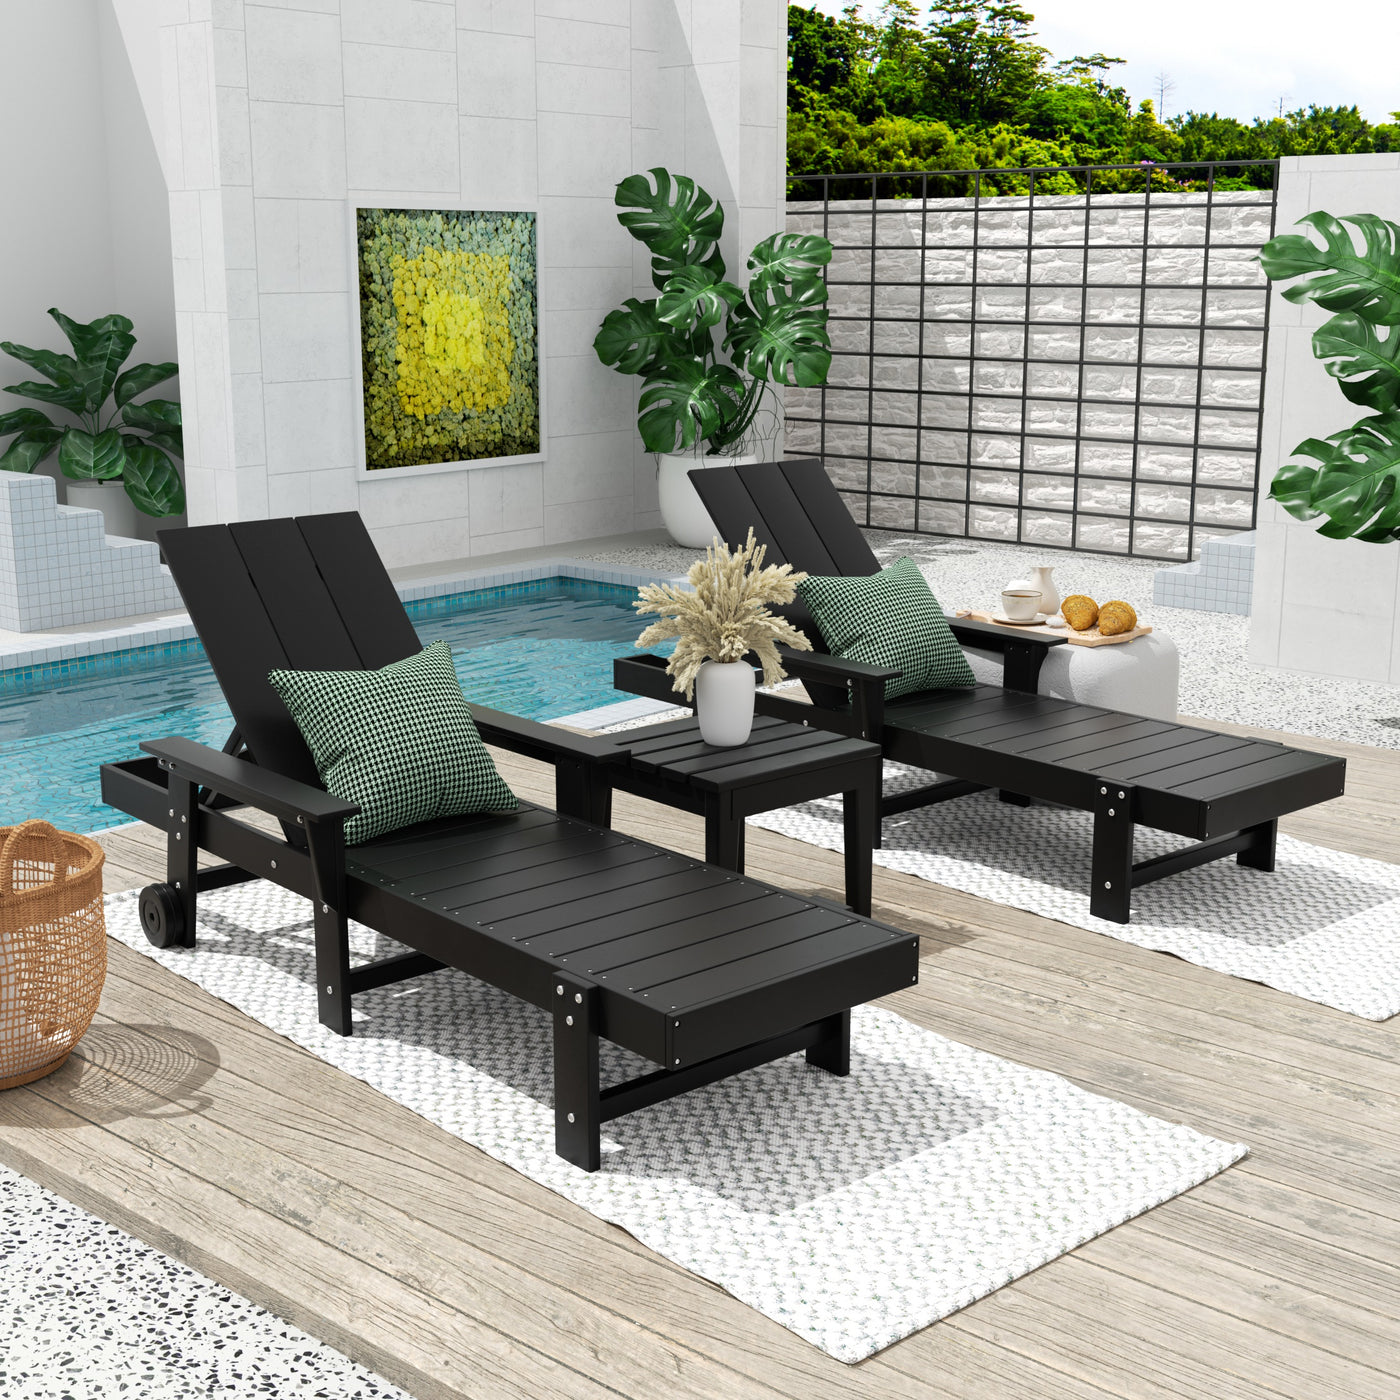 Ashore Modern Poly Reclining Chaise Lounge Set with Side Table